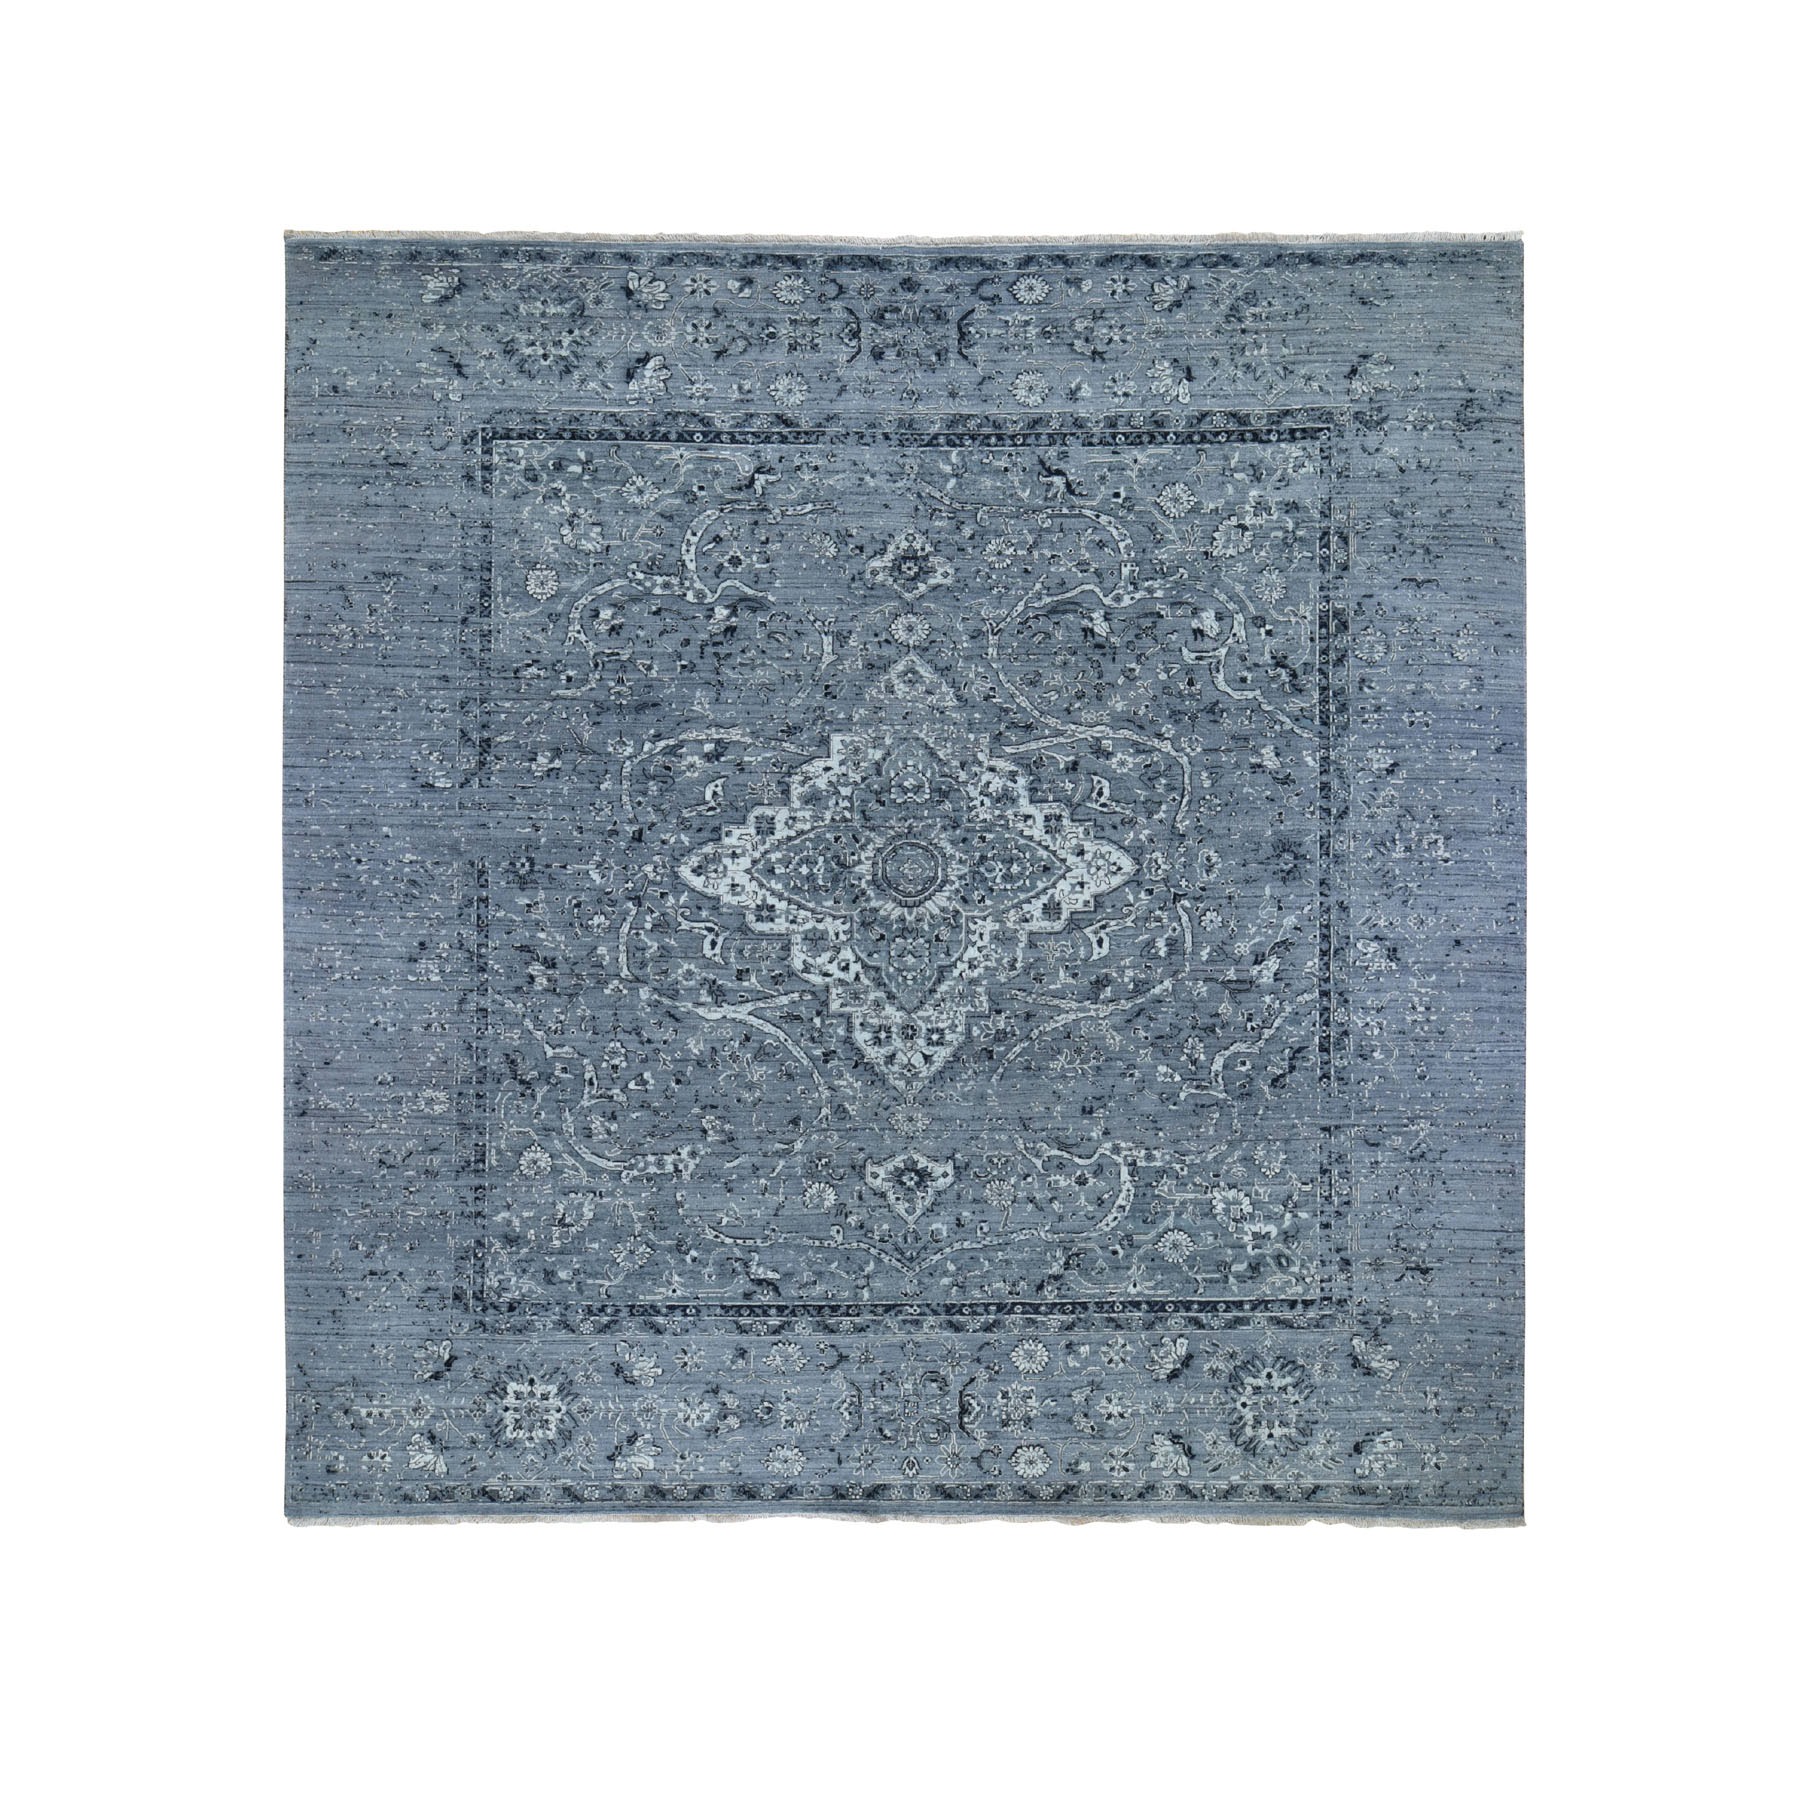 10'x10' Square Gray Broken Persian Erased Design Pure Silk With Textured Wool Hand Woven Oriental Rug 